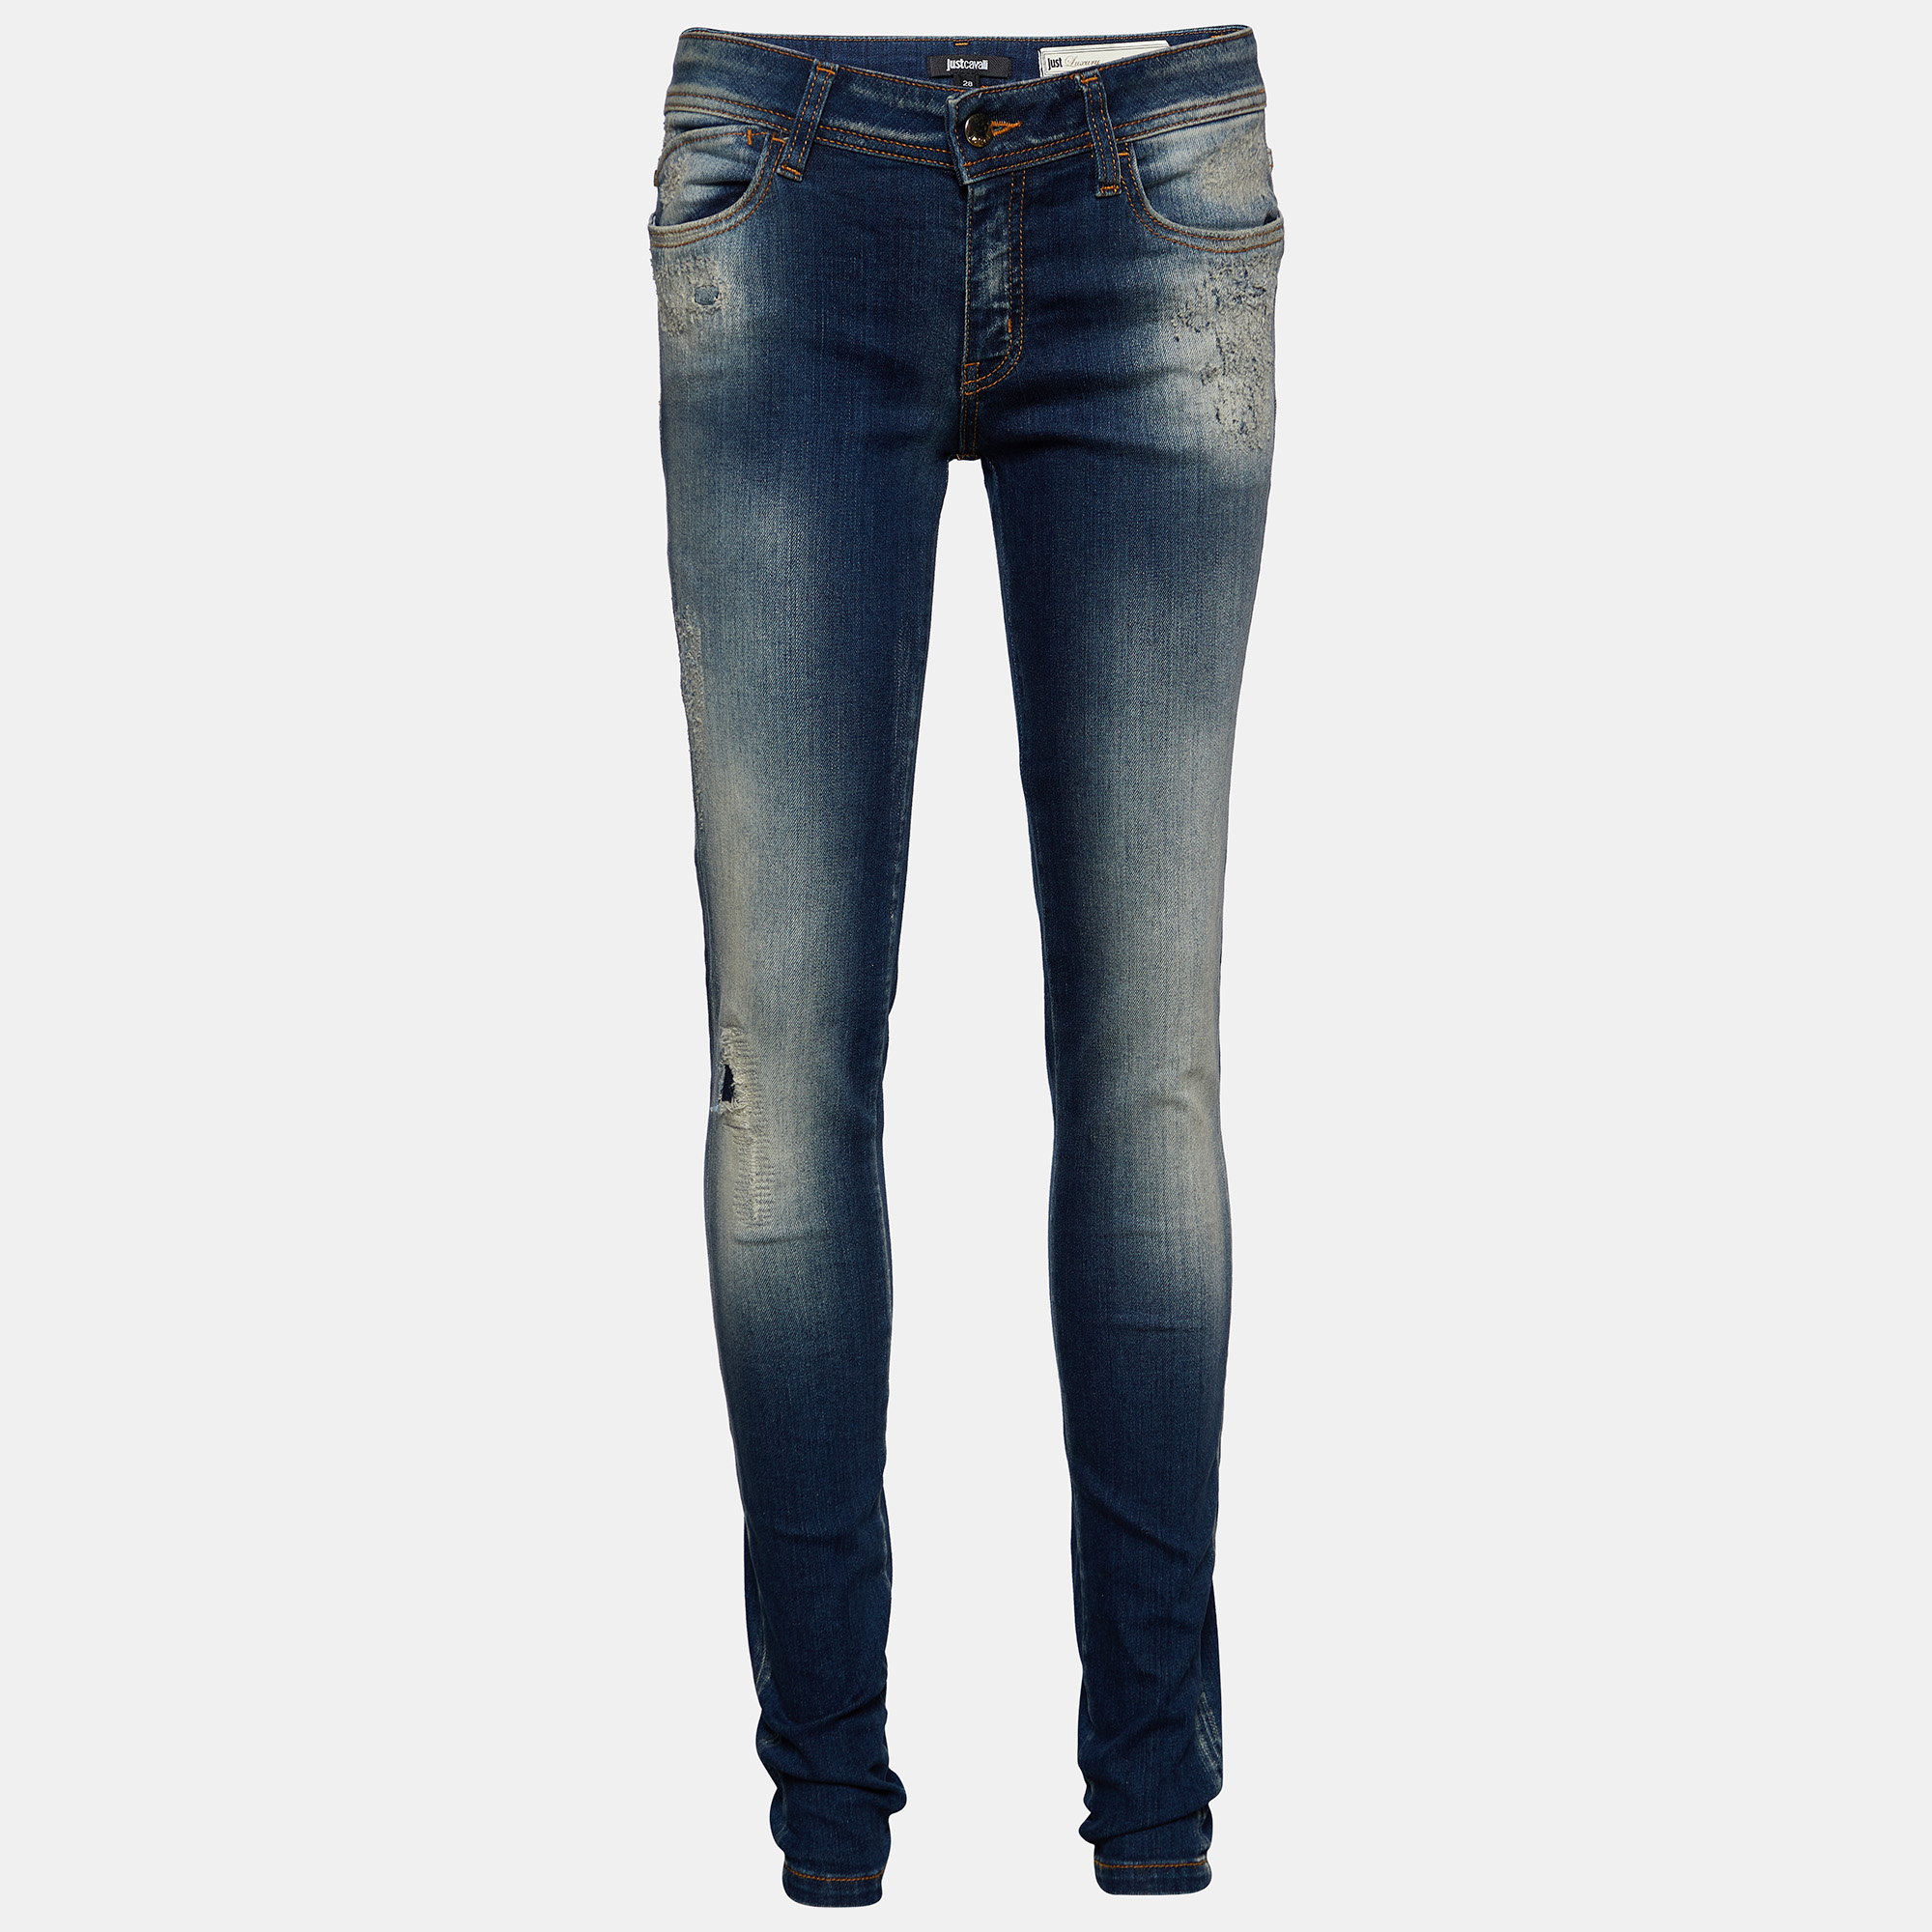 This pair of Just Cavalli Distressed jeans will give you a stylish and edgy casual look. Made from a mix of quality fabrics it has a front zipper closure and five external pockets. Team it up with your favorite shirt or t shirt for a cool edit.